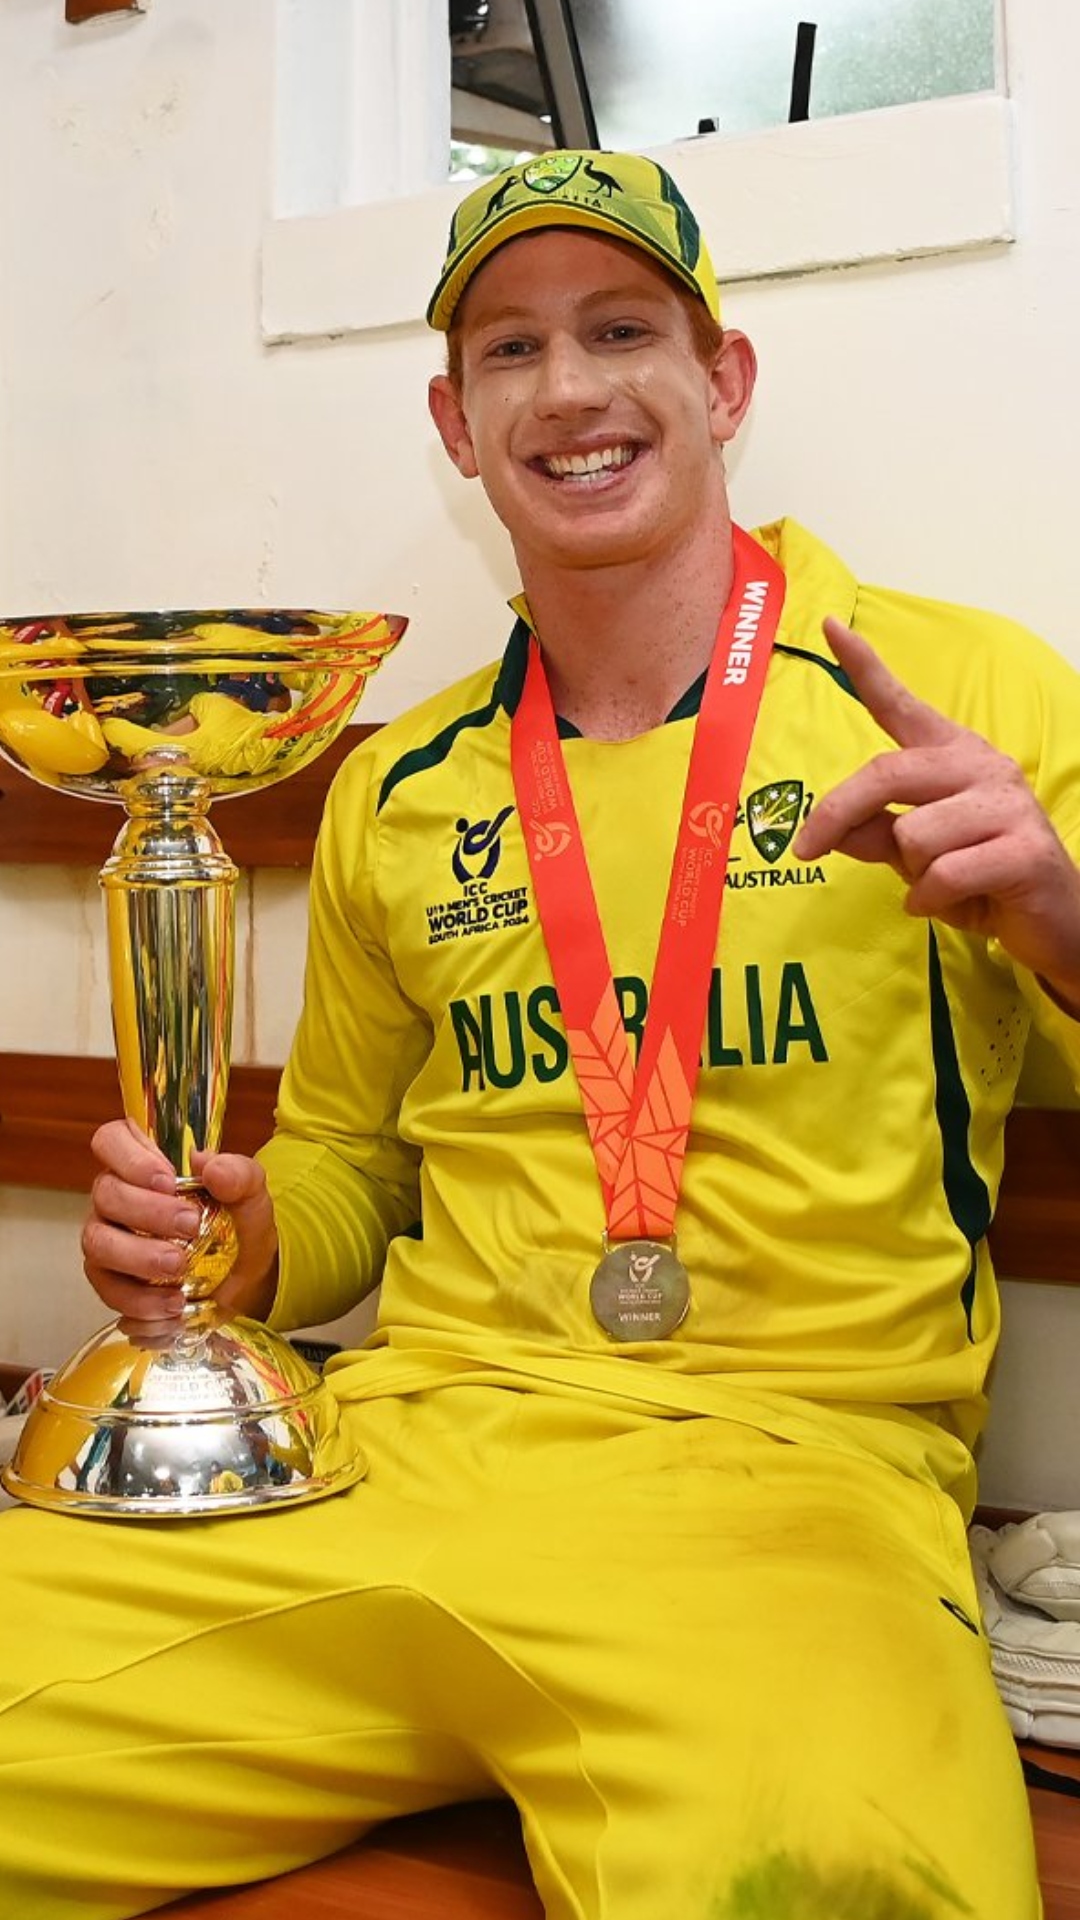 Most ICC trophies won by a team as Australia extends its lead with U19 World Cup&nbsp;triumph